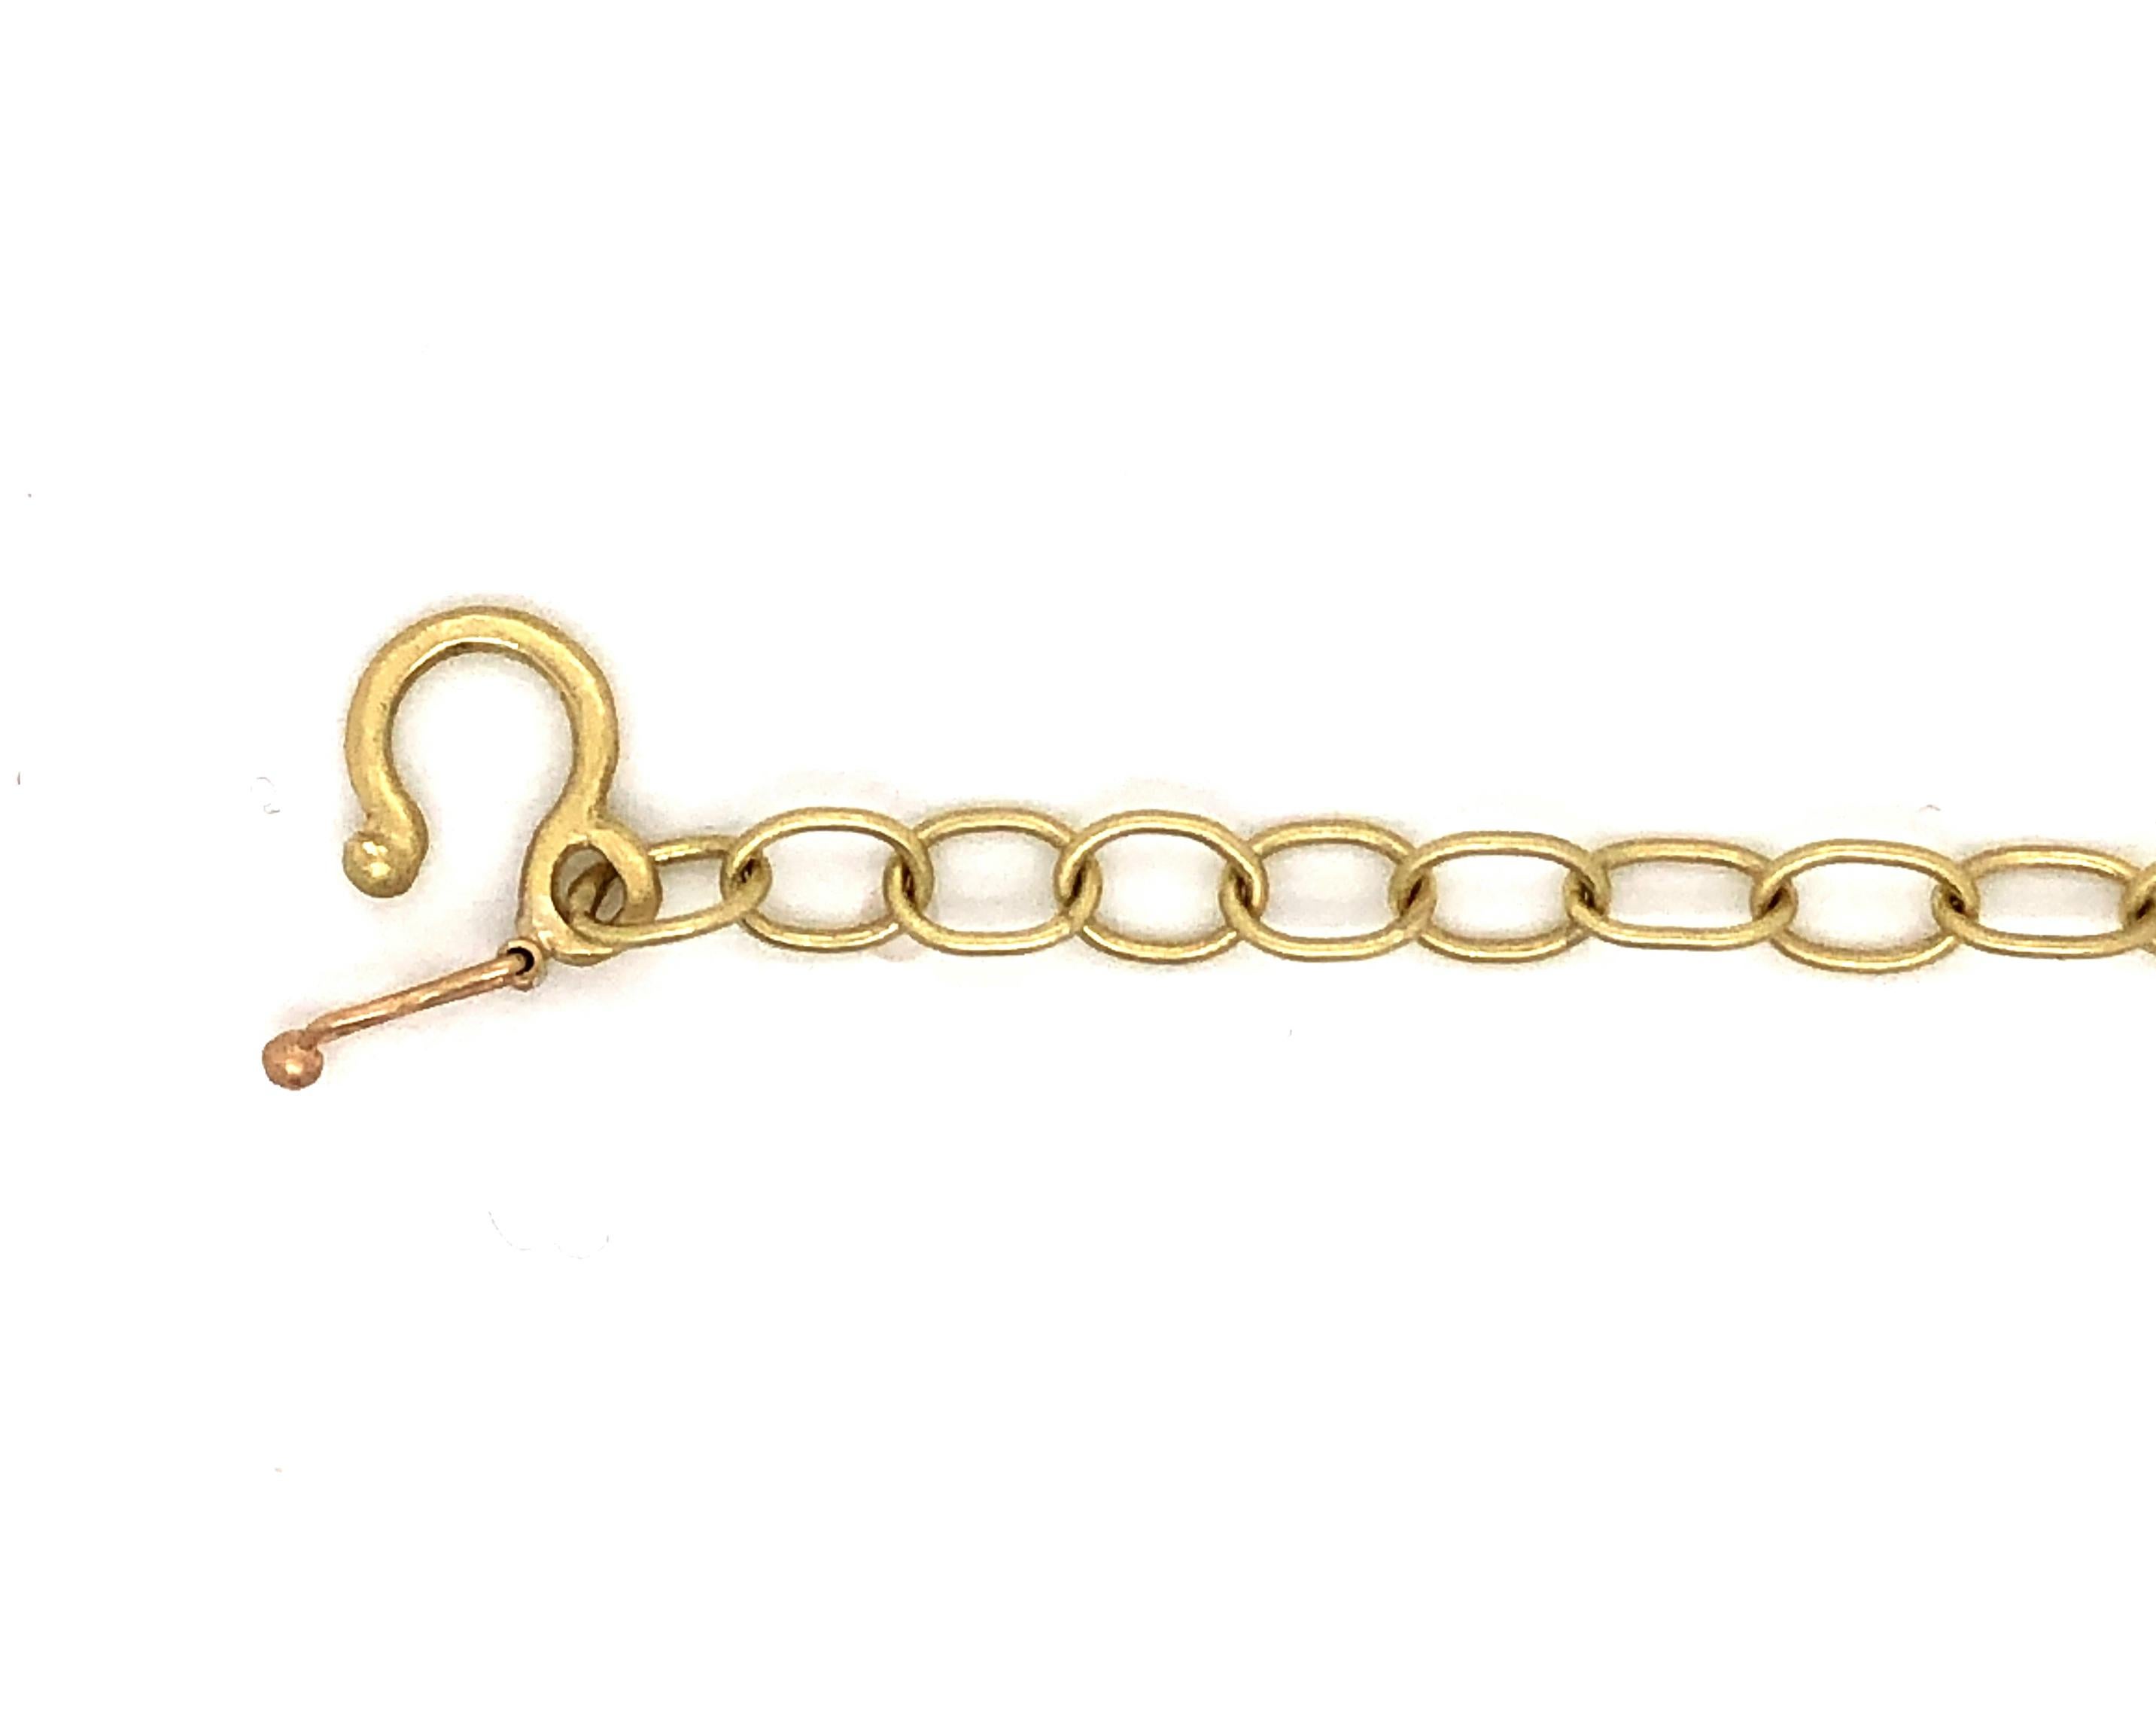 Faye Kim 18 Karat Gold Oval Link Chain

Classic and versatile, Faye's 18 karat gold handmade oval link chain is a must in every jewelry wardrobe. It elevates the traditional cable link chain to a new level.  Great to wear alone or as a layering